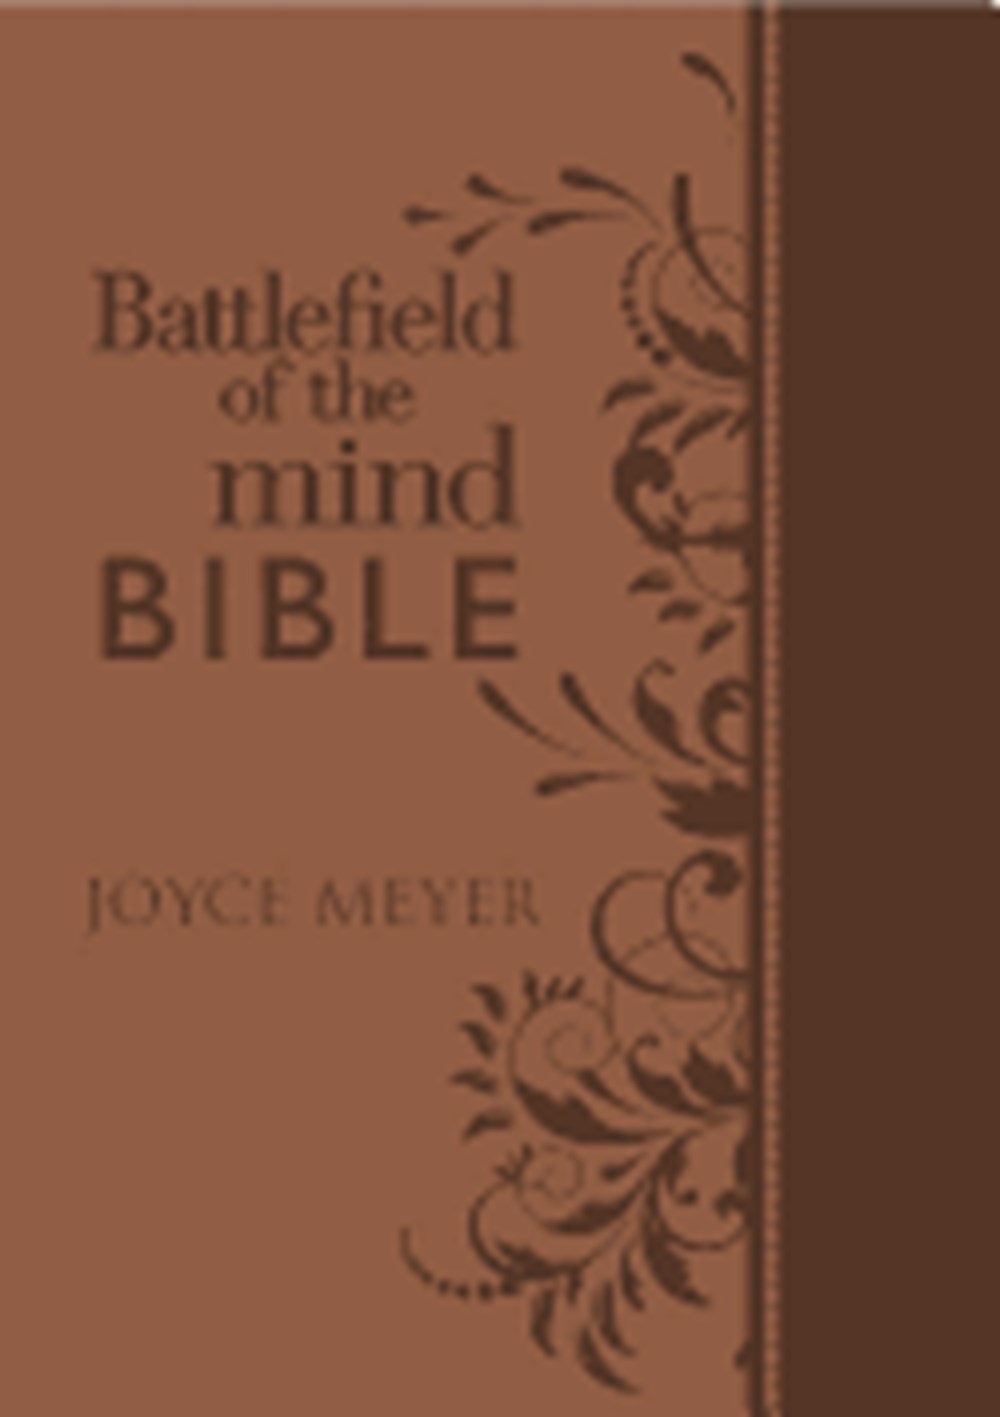 Battlefield of the Mind Bible Renew Your Mind Through the Power of God's Word